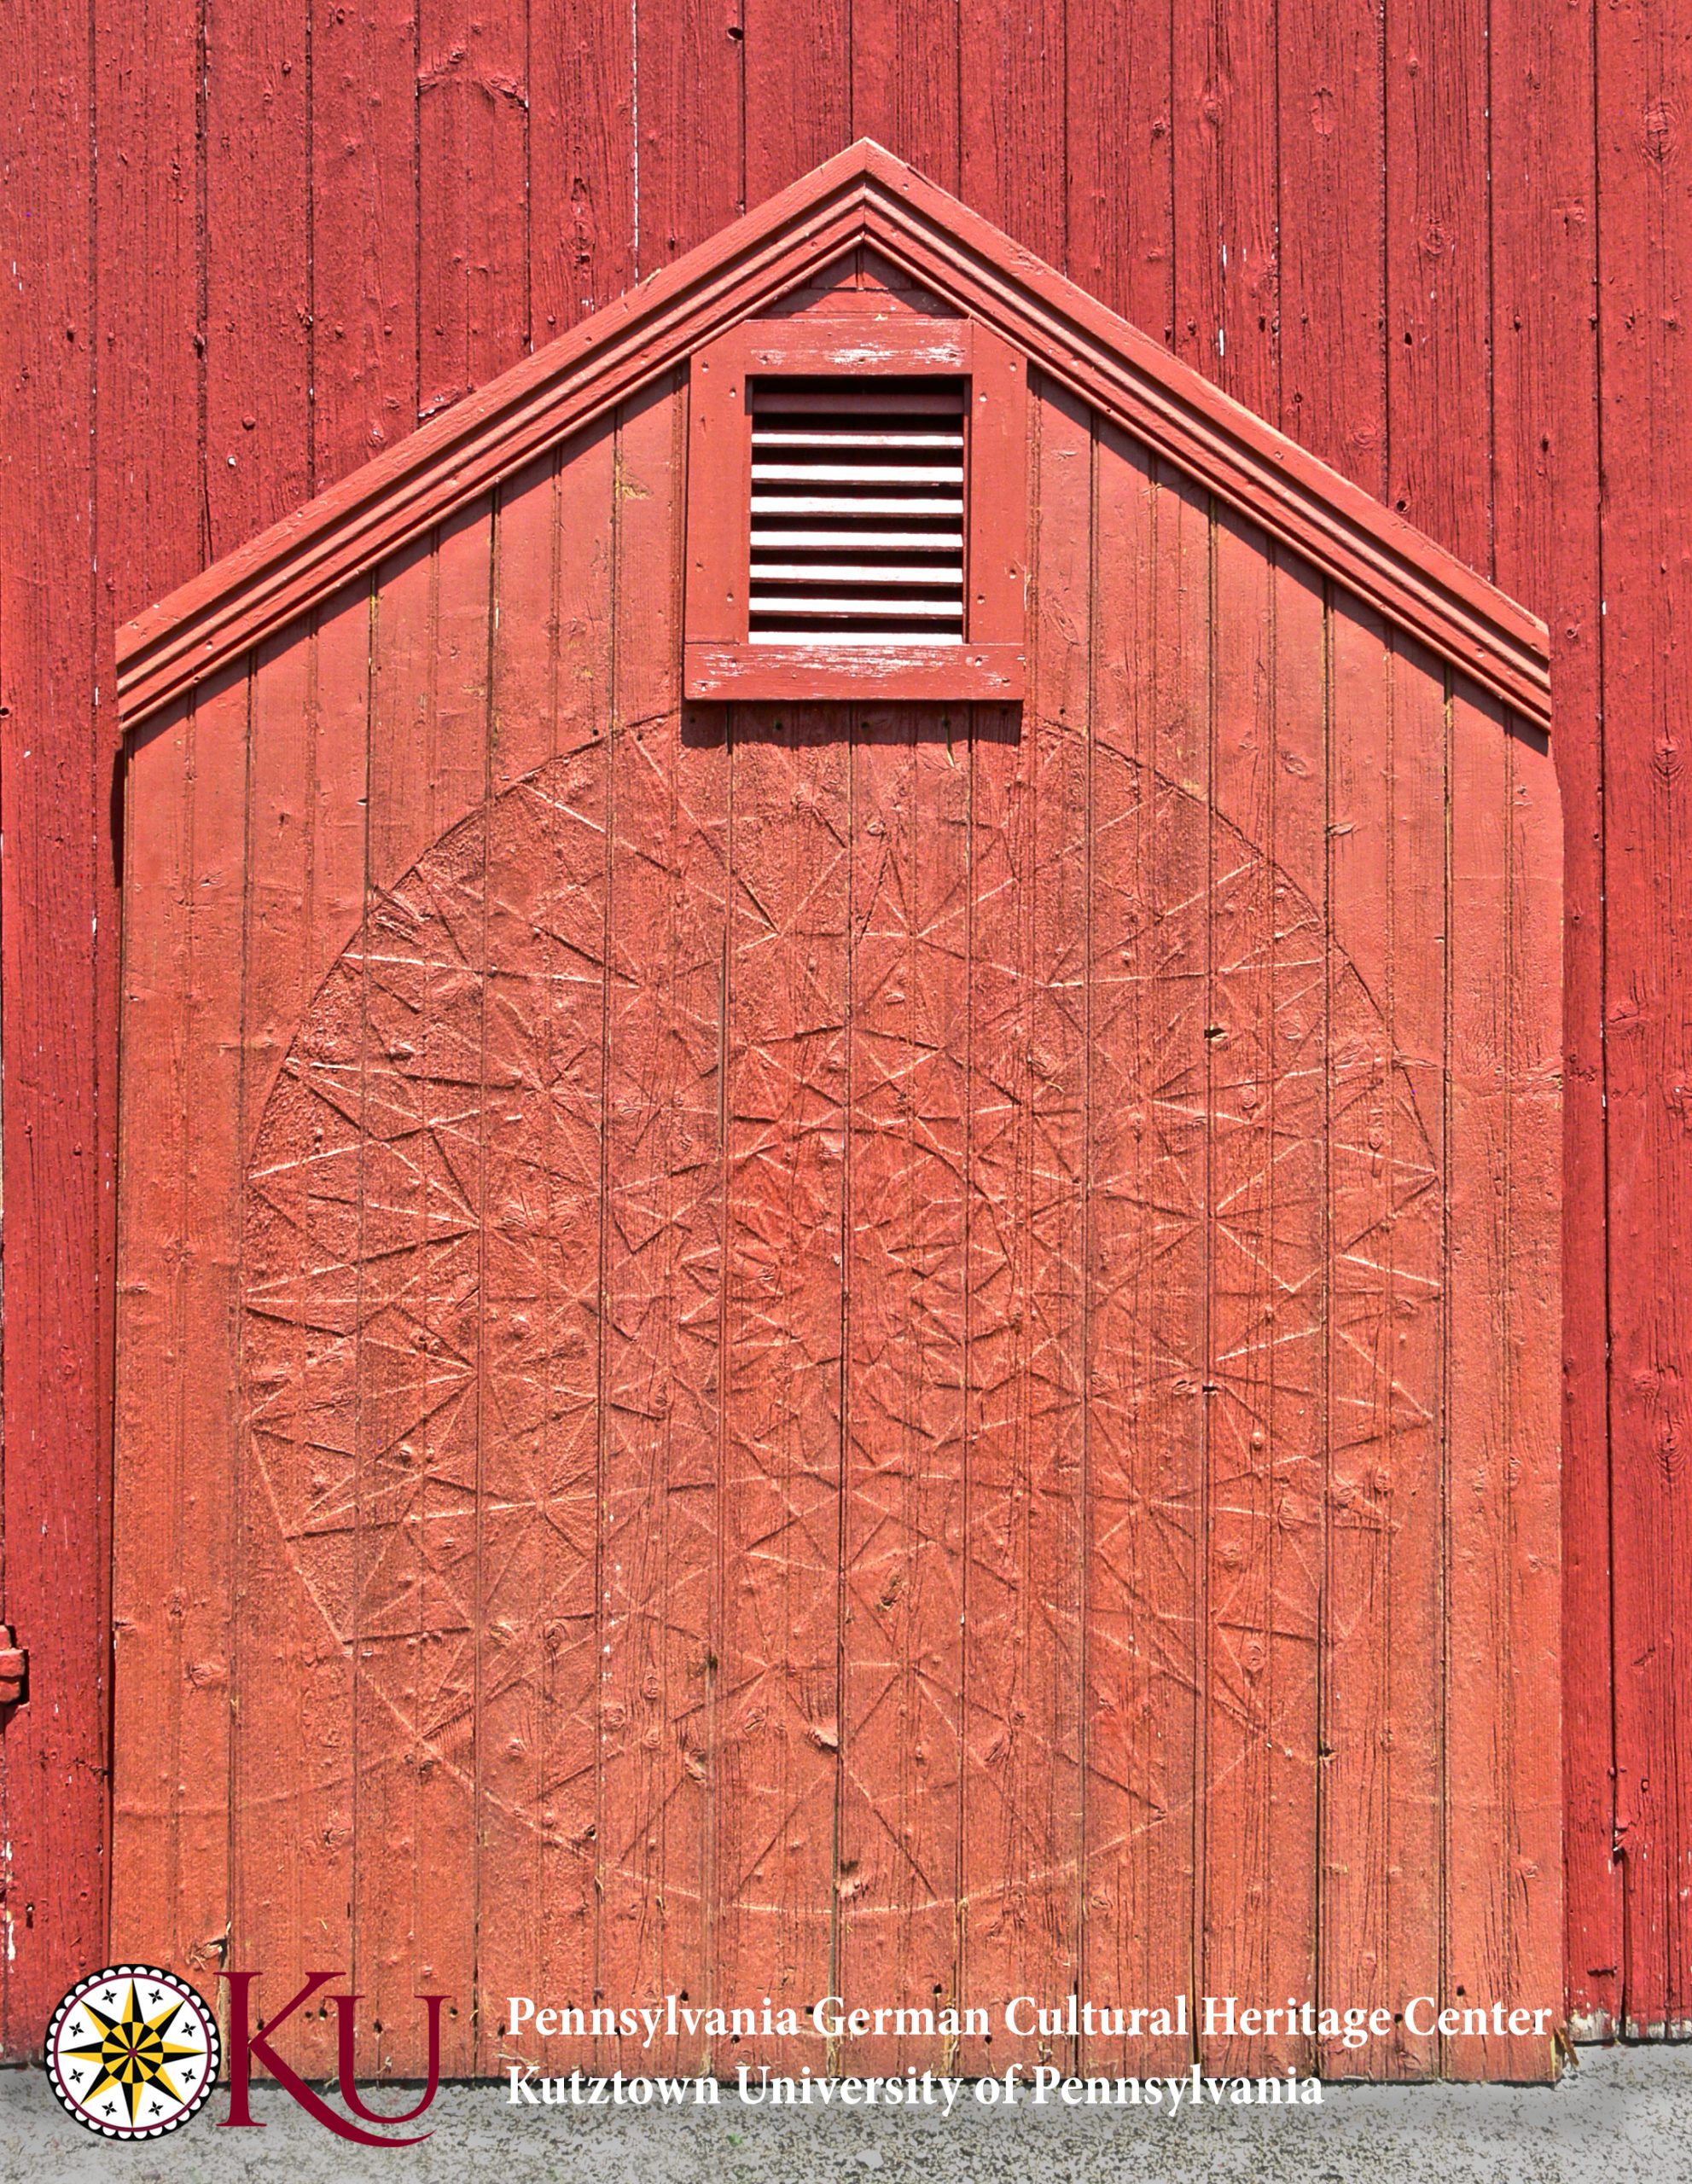 An extremely detailed barn star ghost or relief of what was previously painted. While the wood is all red in color, the relief of a 32-point star and star bursts can be seen in the right light or felt to the touch.